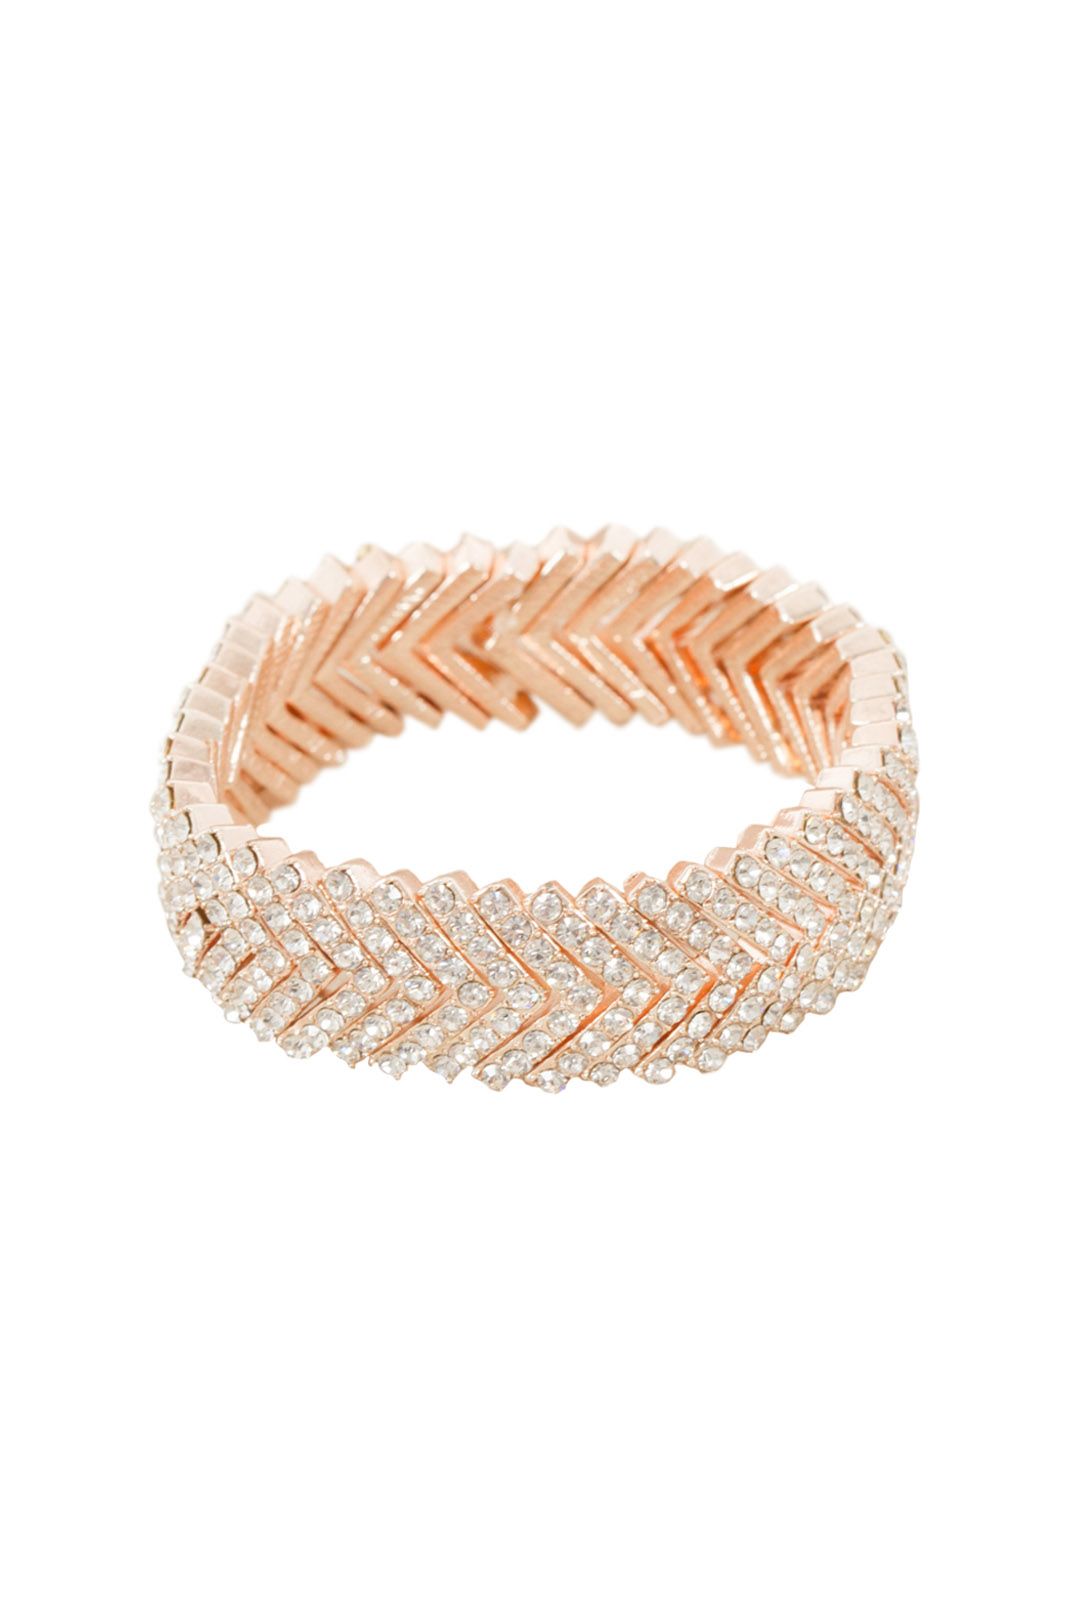 Adorne - Diamante Stacked V Cuff - Rose Gold - Front